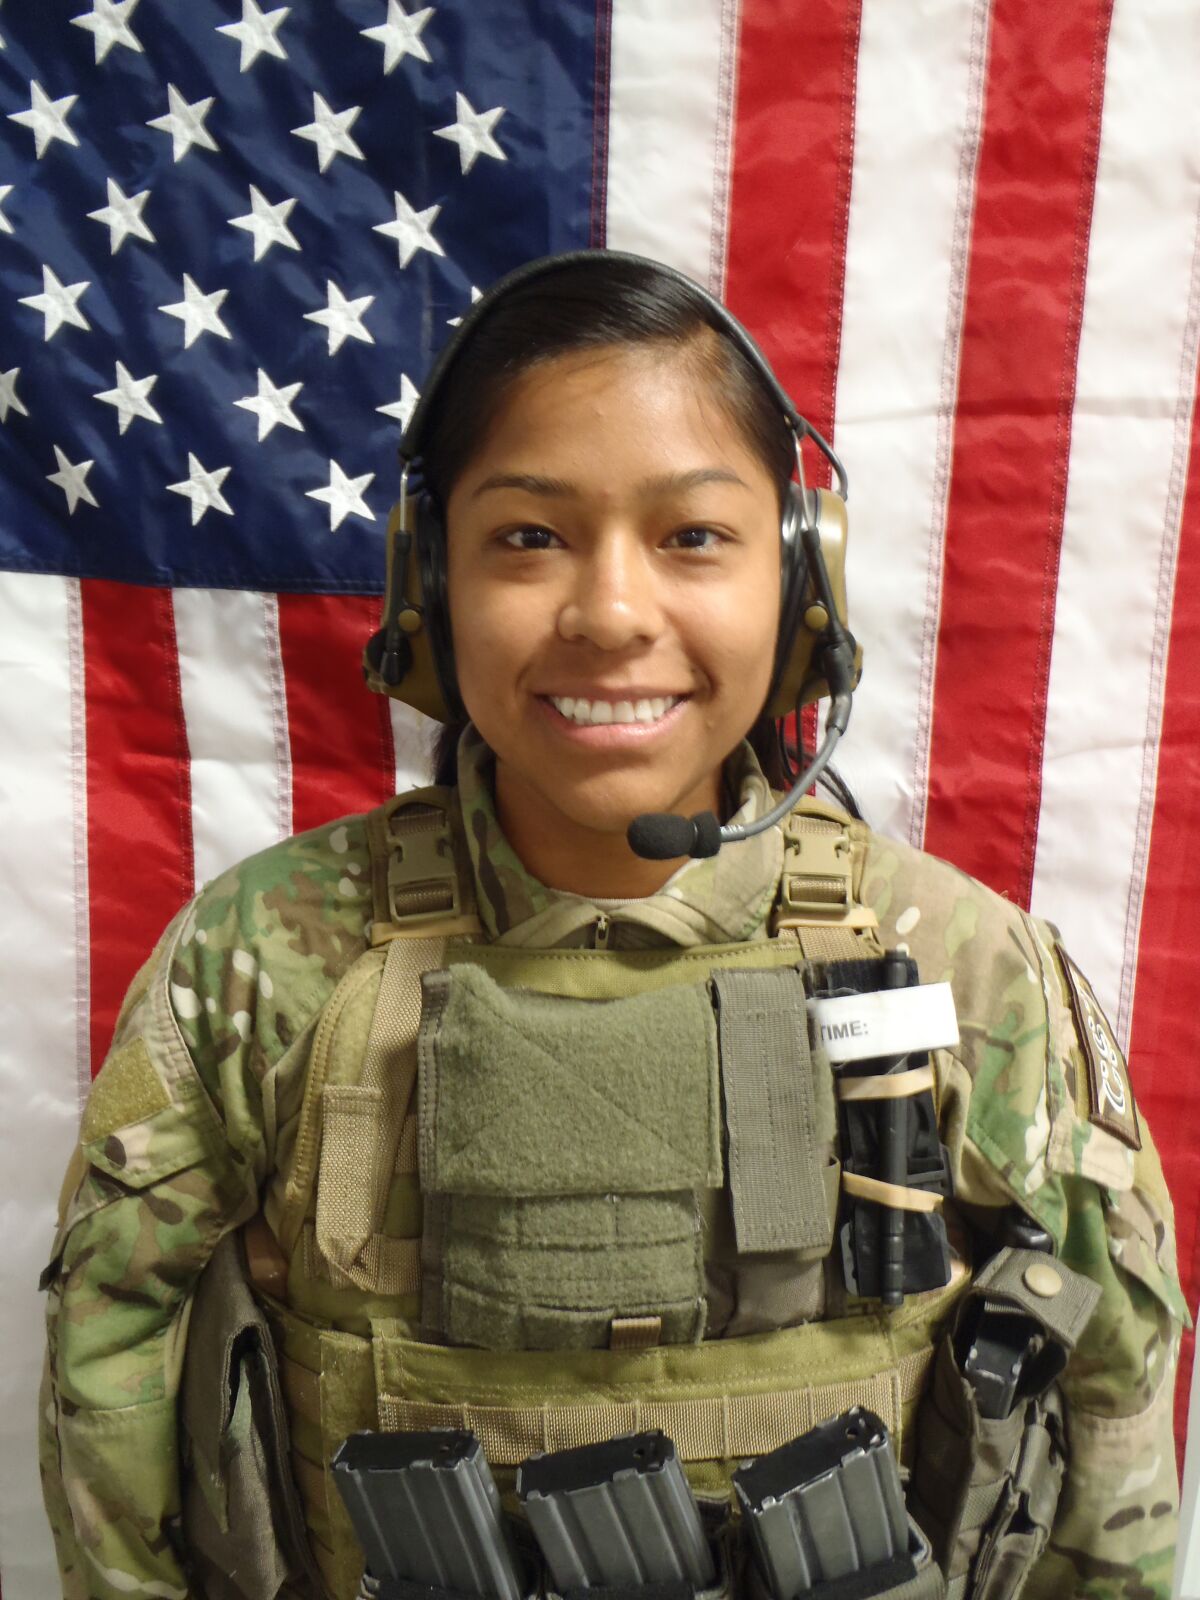 Then-Army 1st Lt. Jennifer Moreno is seen in an undated photo.